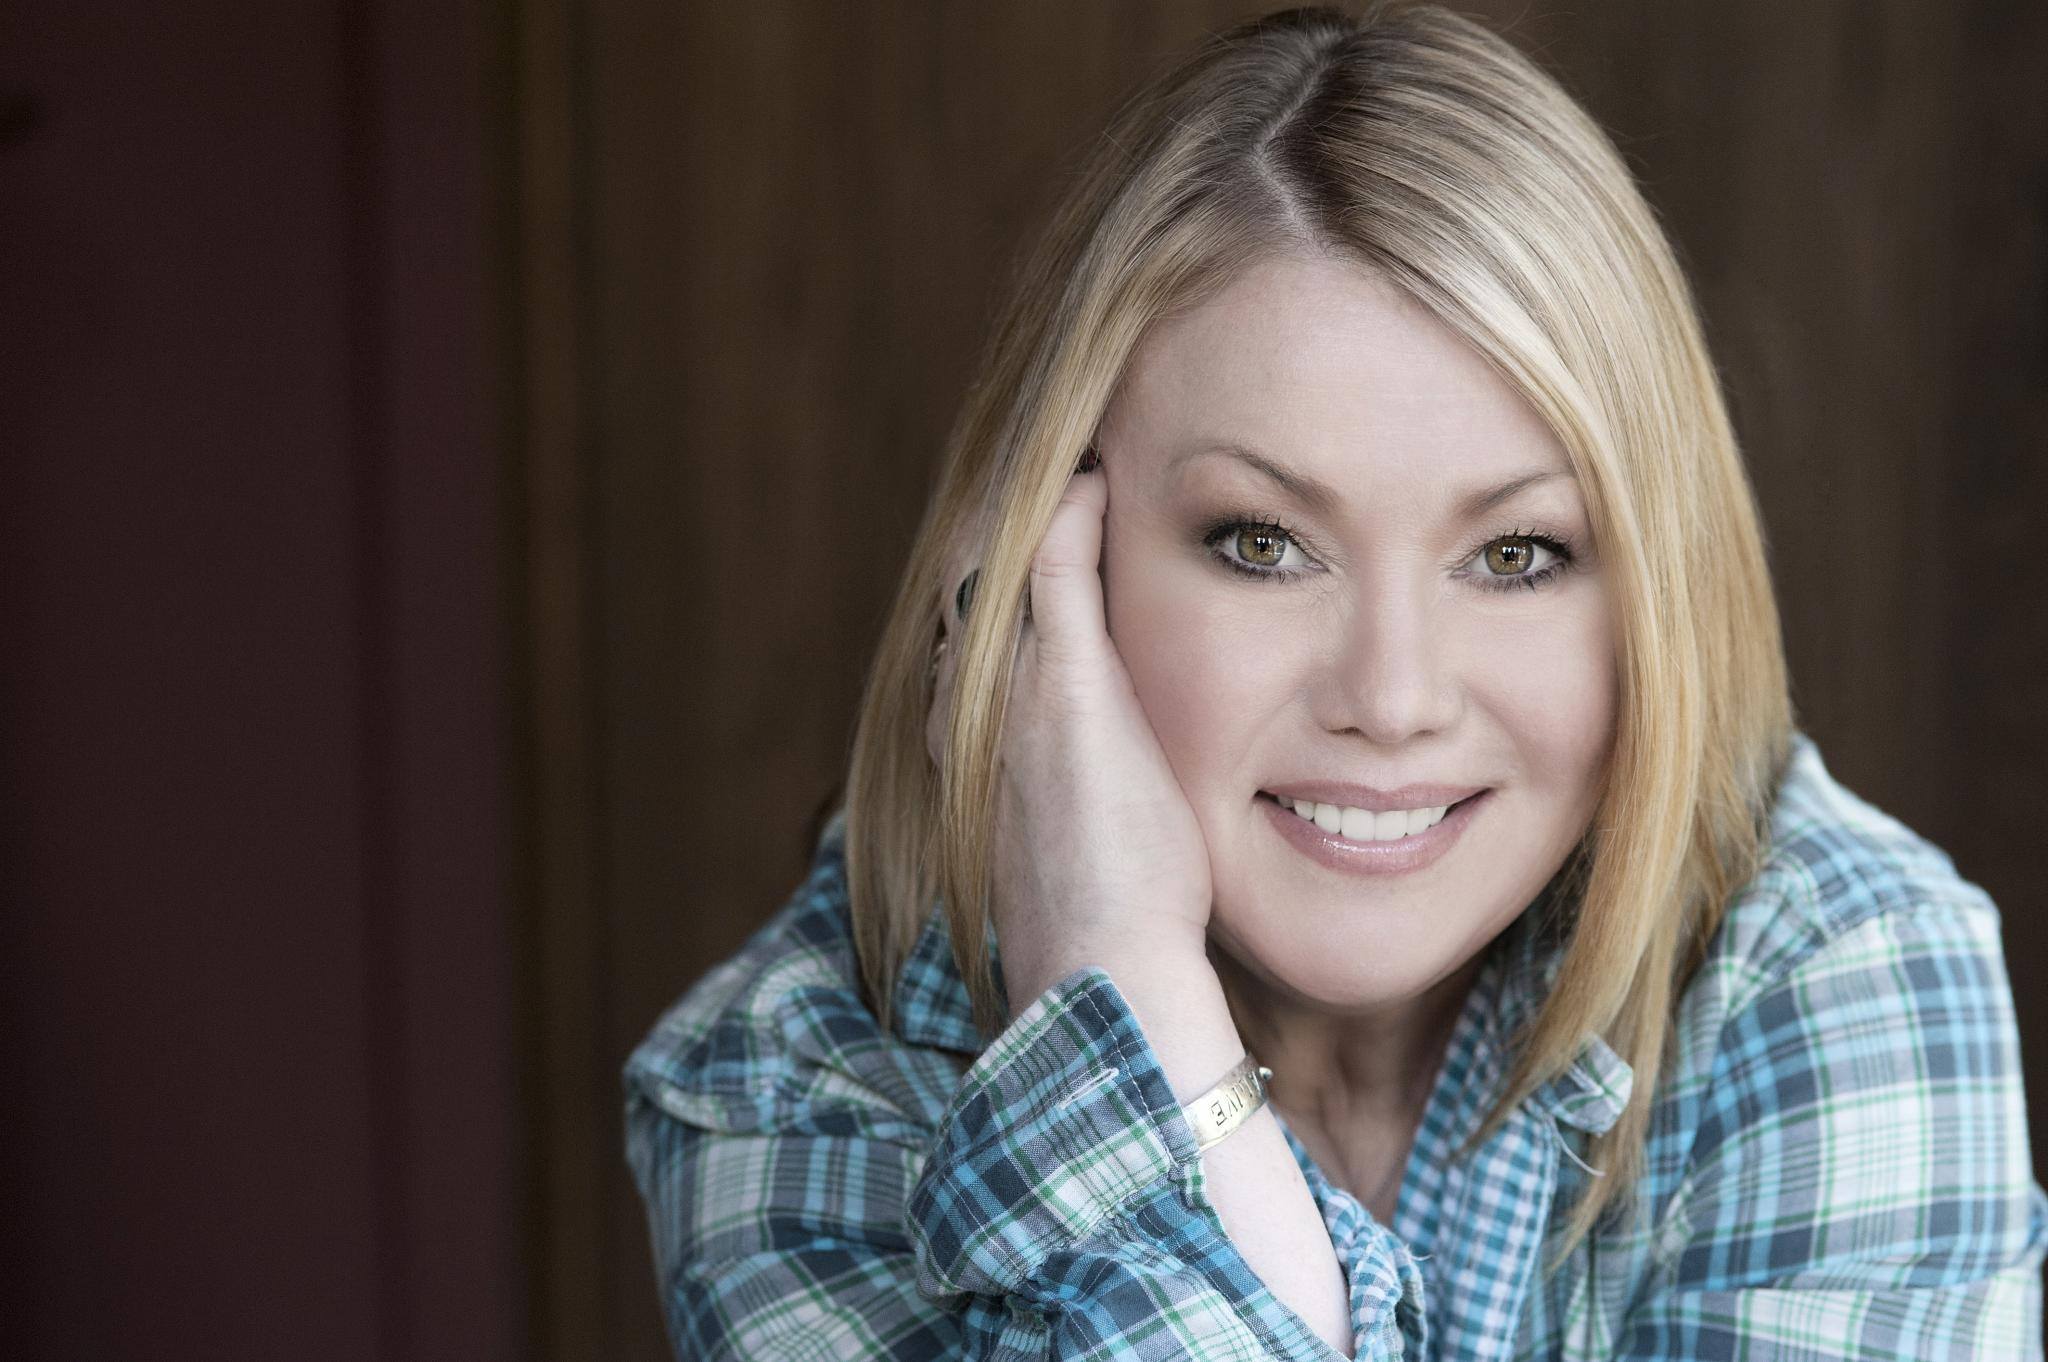 CANADA’S OWN - Alberta singer/songwriter Jann Arden is including Red Deer on her upcoming tour. She plays the Memorial Centre on March 25th.